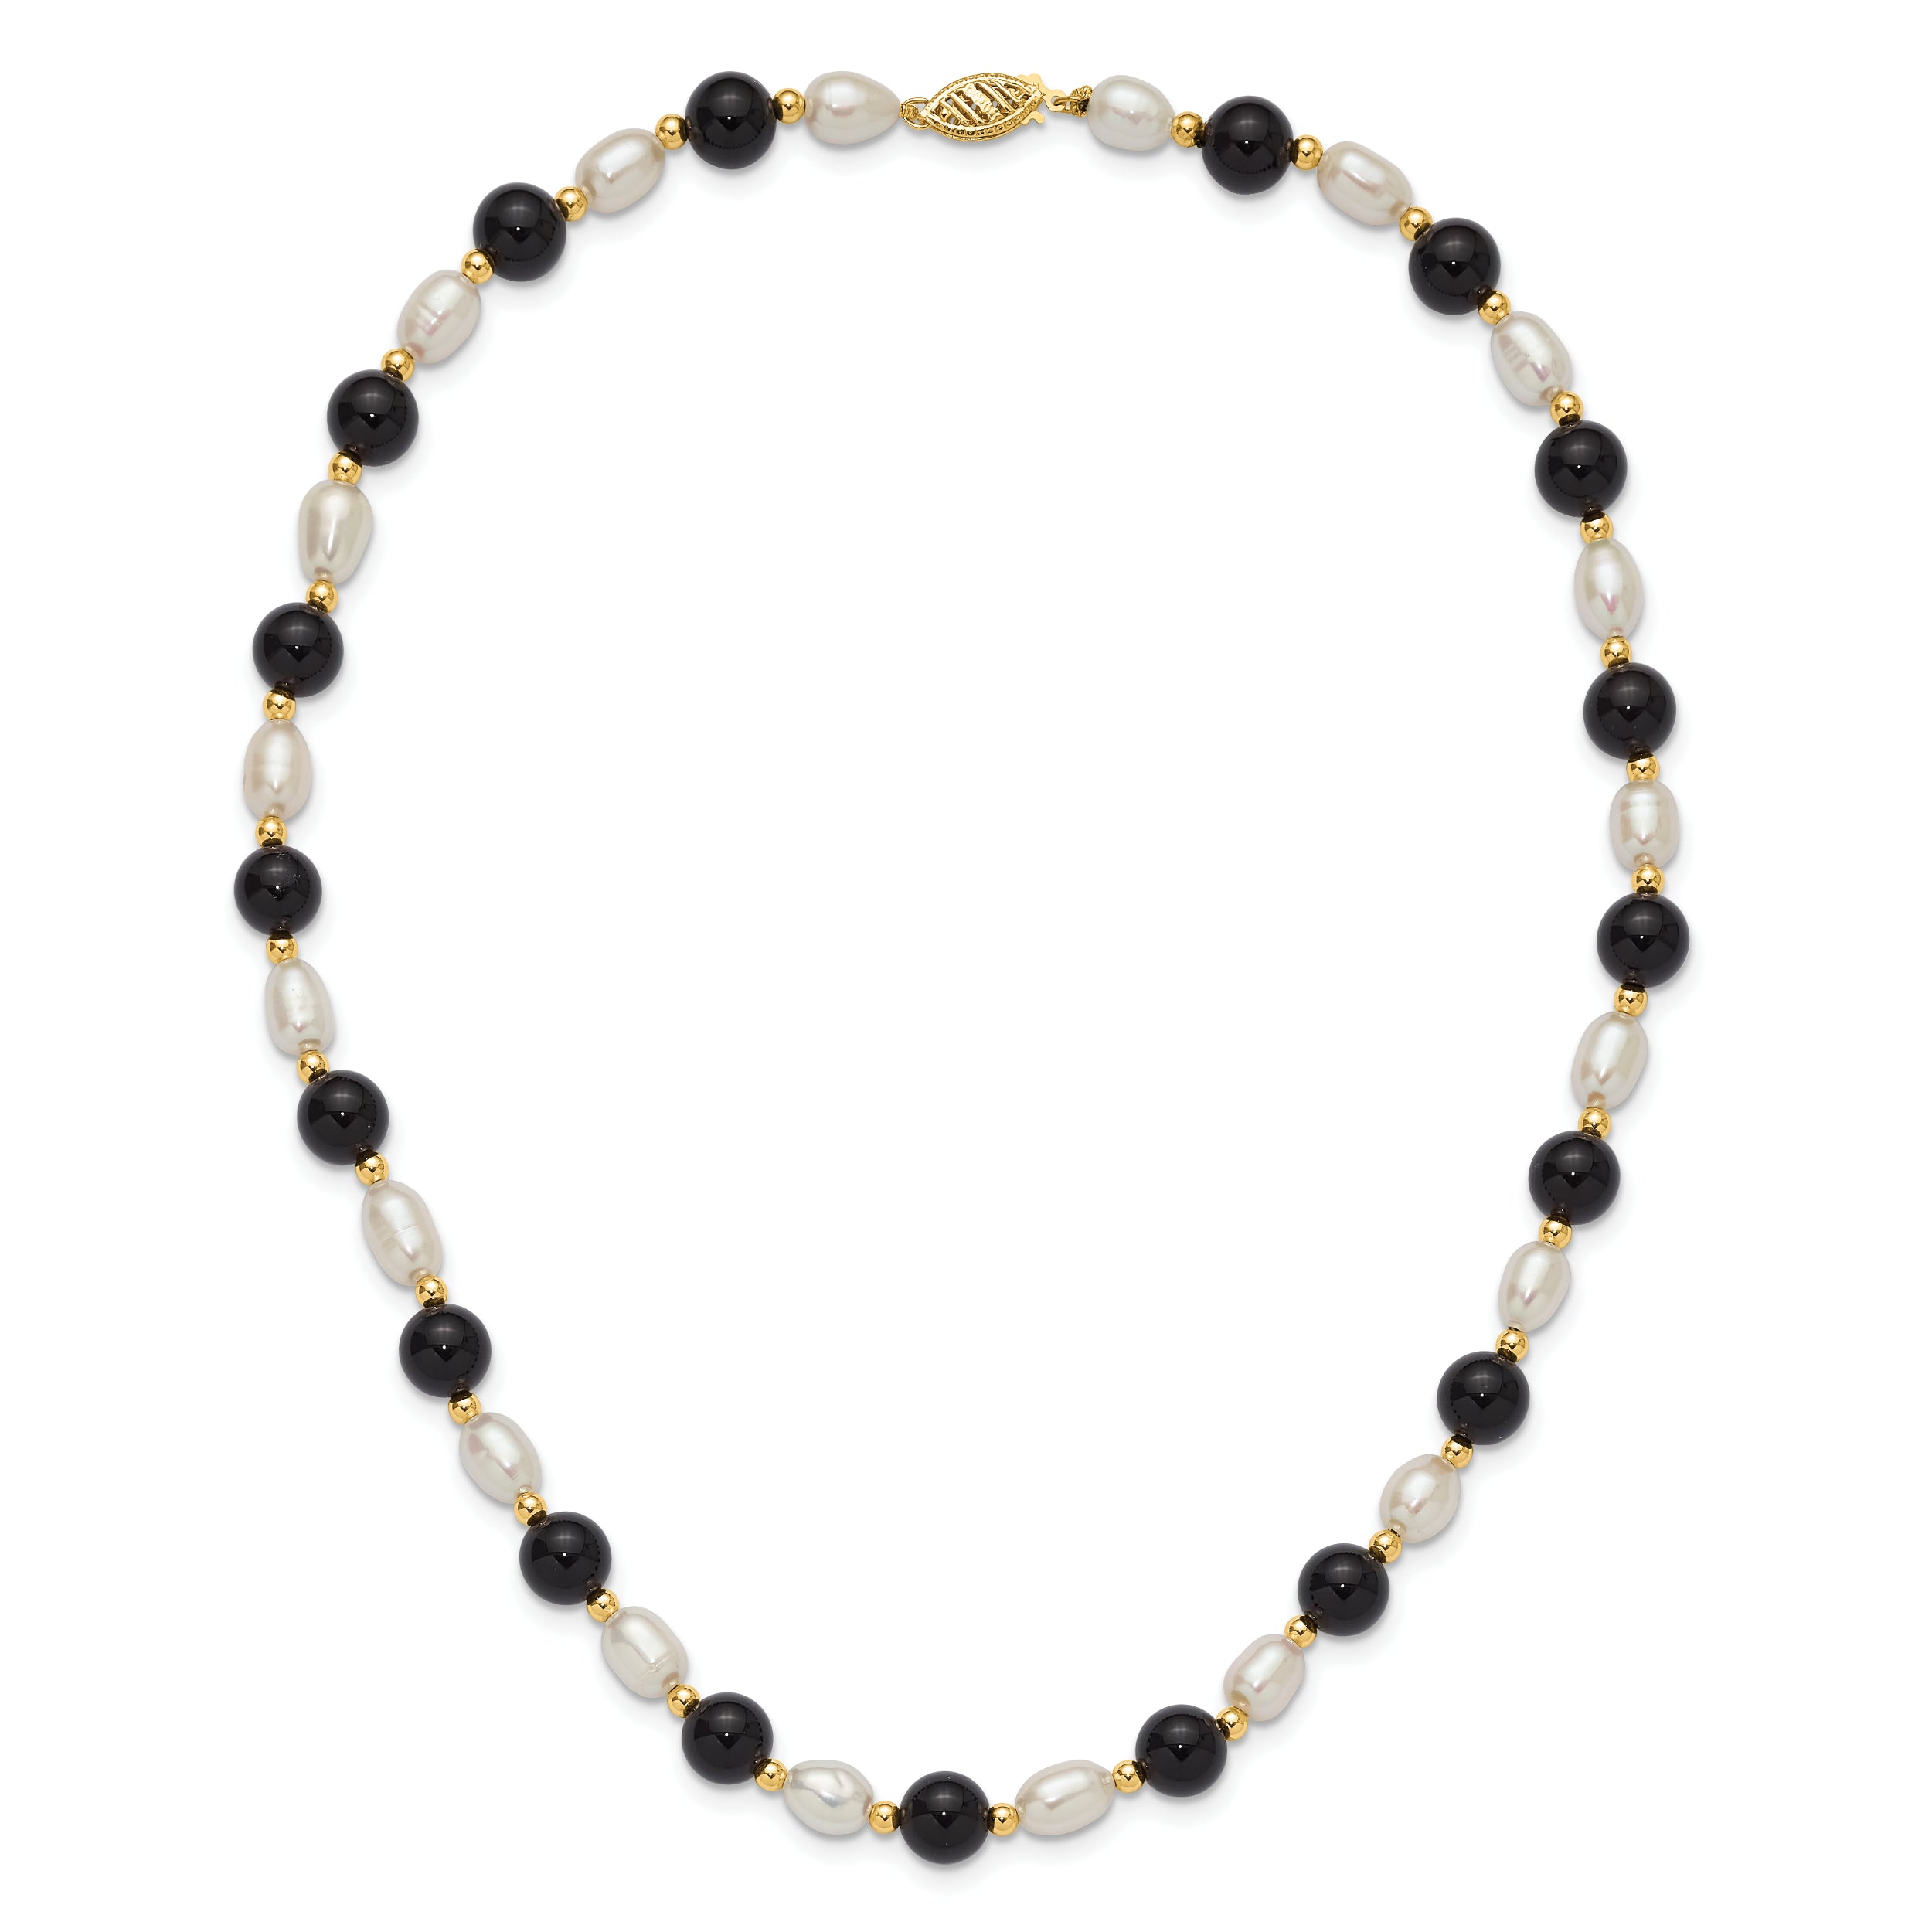 14k 6-7mm White Rice FW Cultured Pearl Onyx Bead Necklace